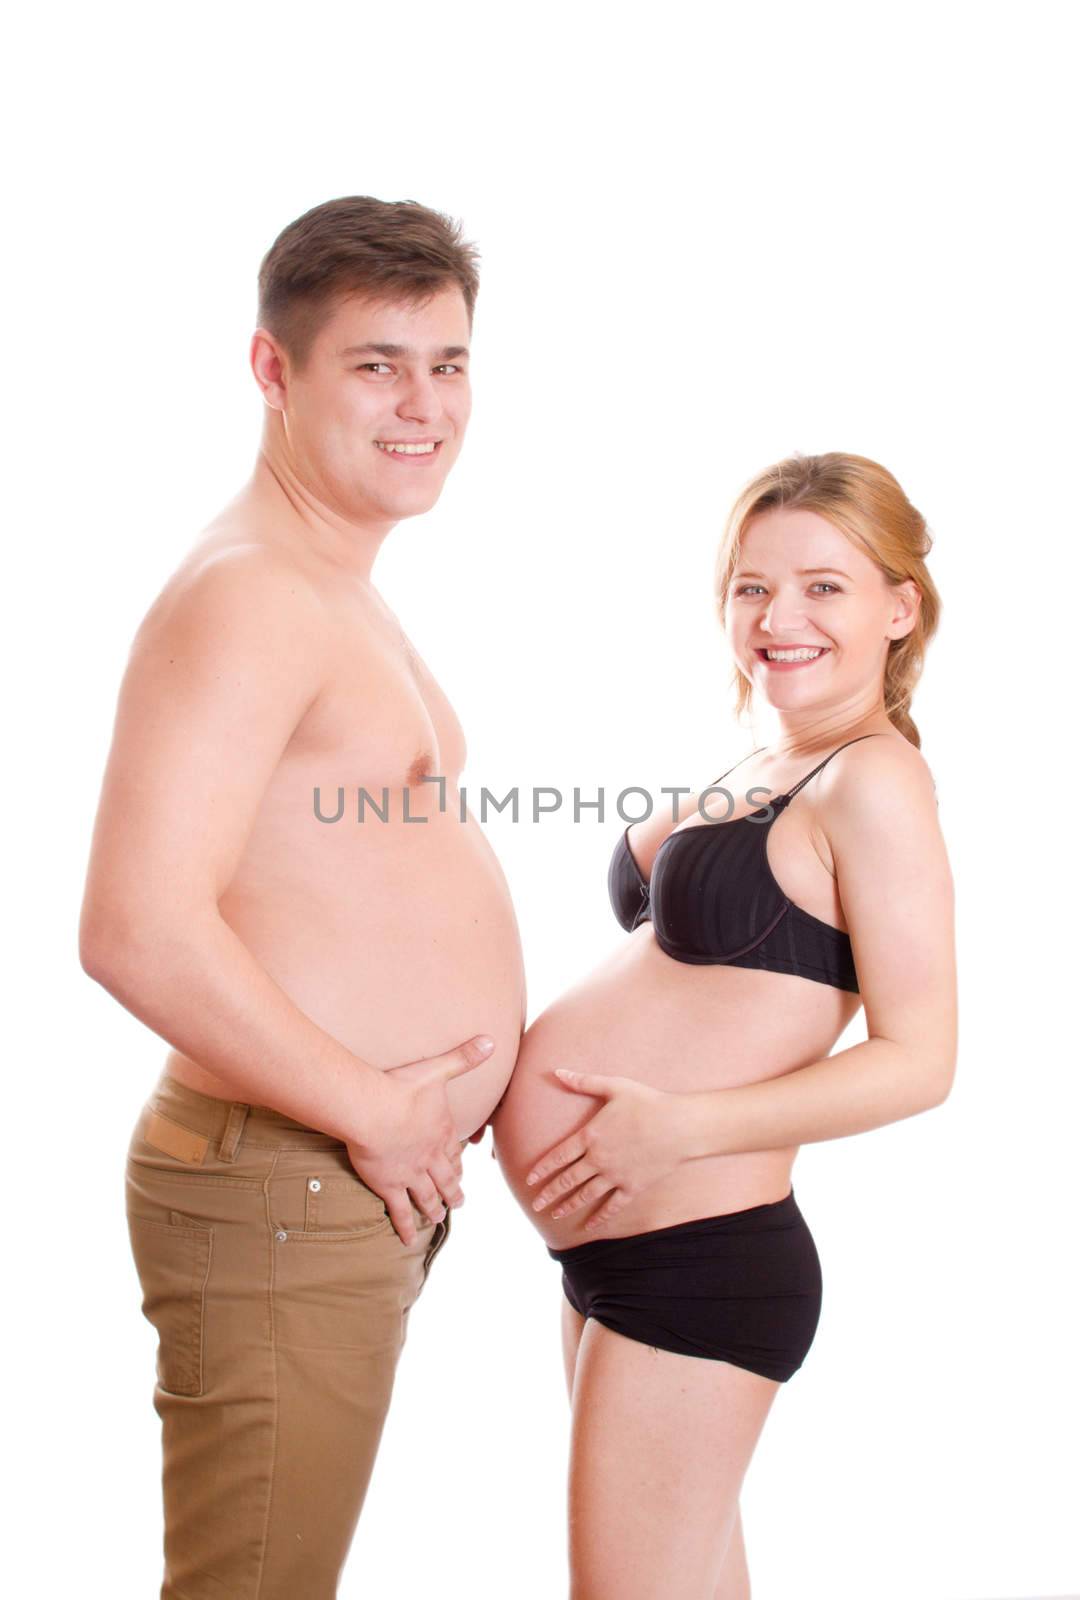 Pregnant woman and heavy man displaying their bare stomachs, caucasian/white.